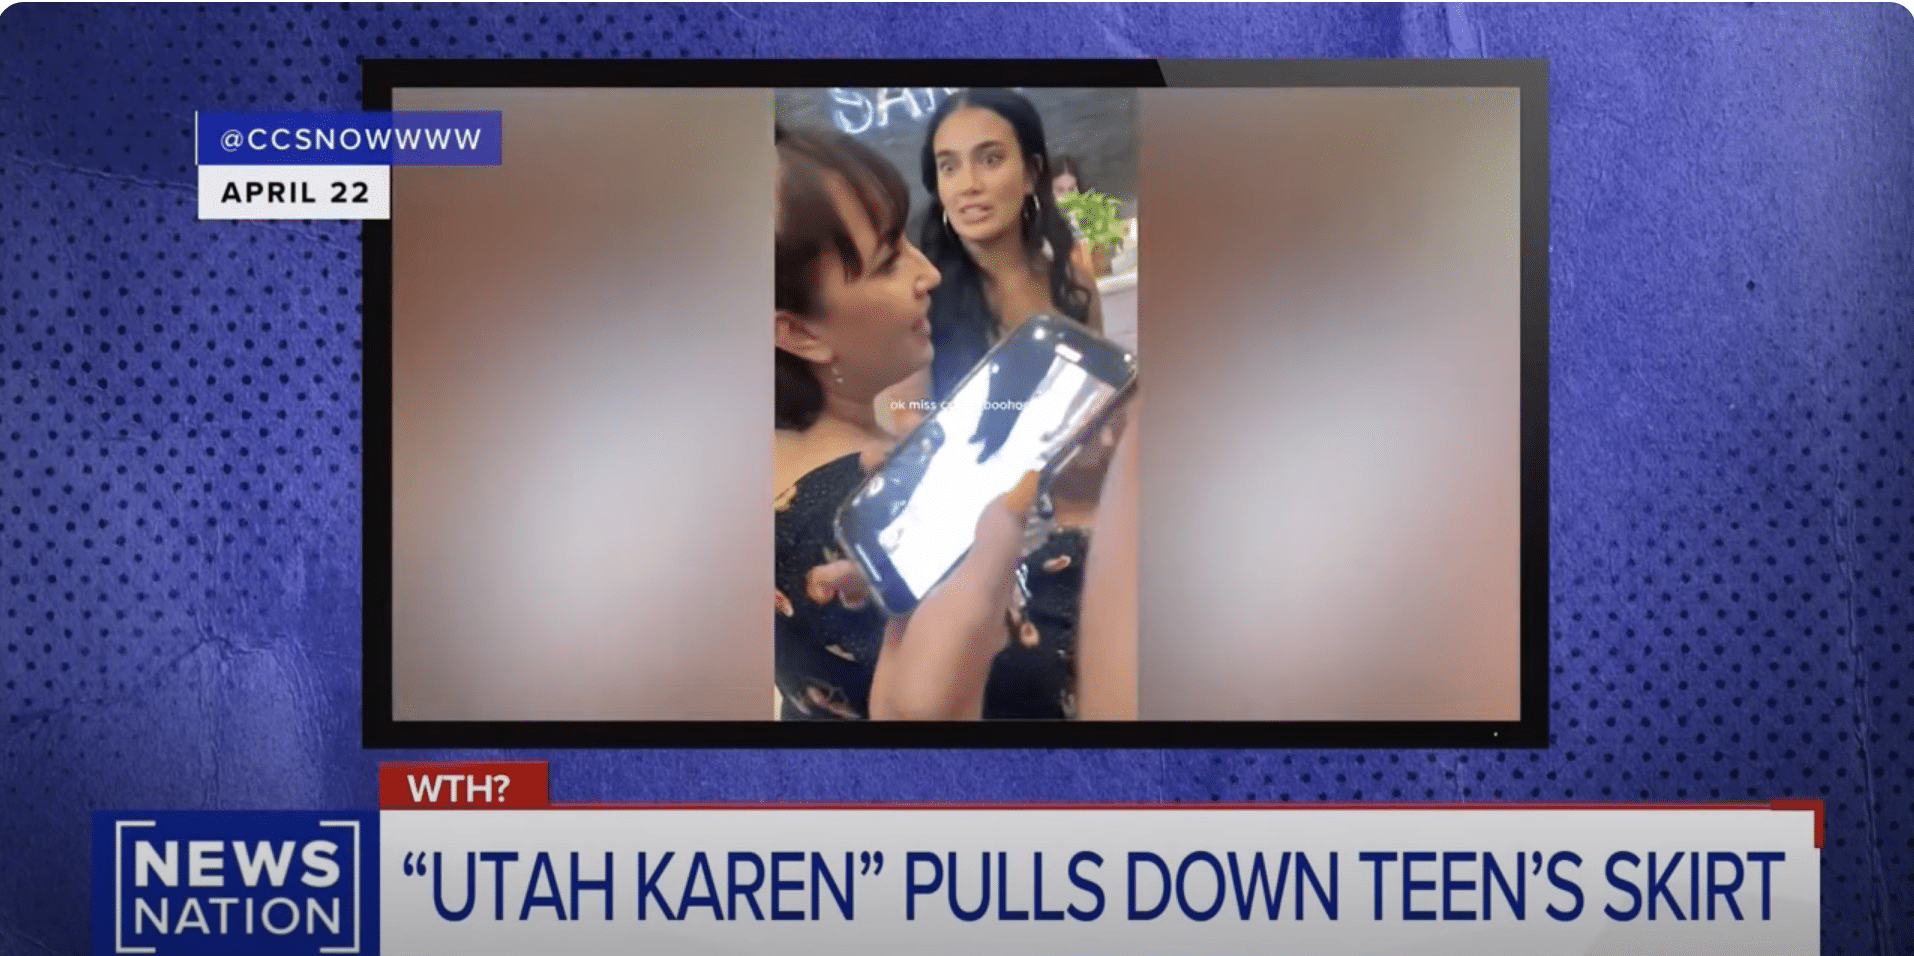 Woman charged and labeled “Karen” after confronting teen girl over mini skirt exposing herself in the presence of children